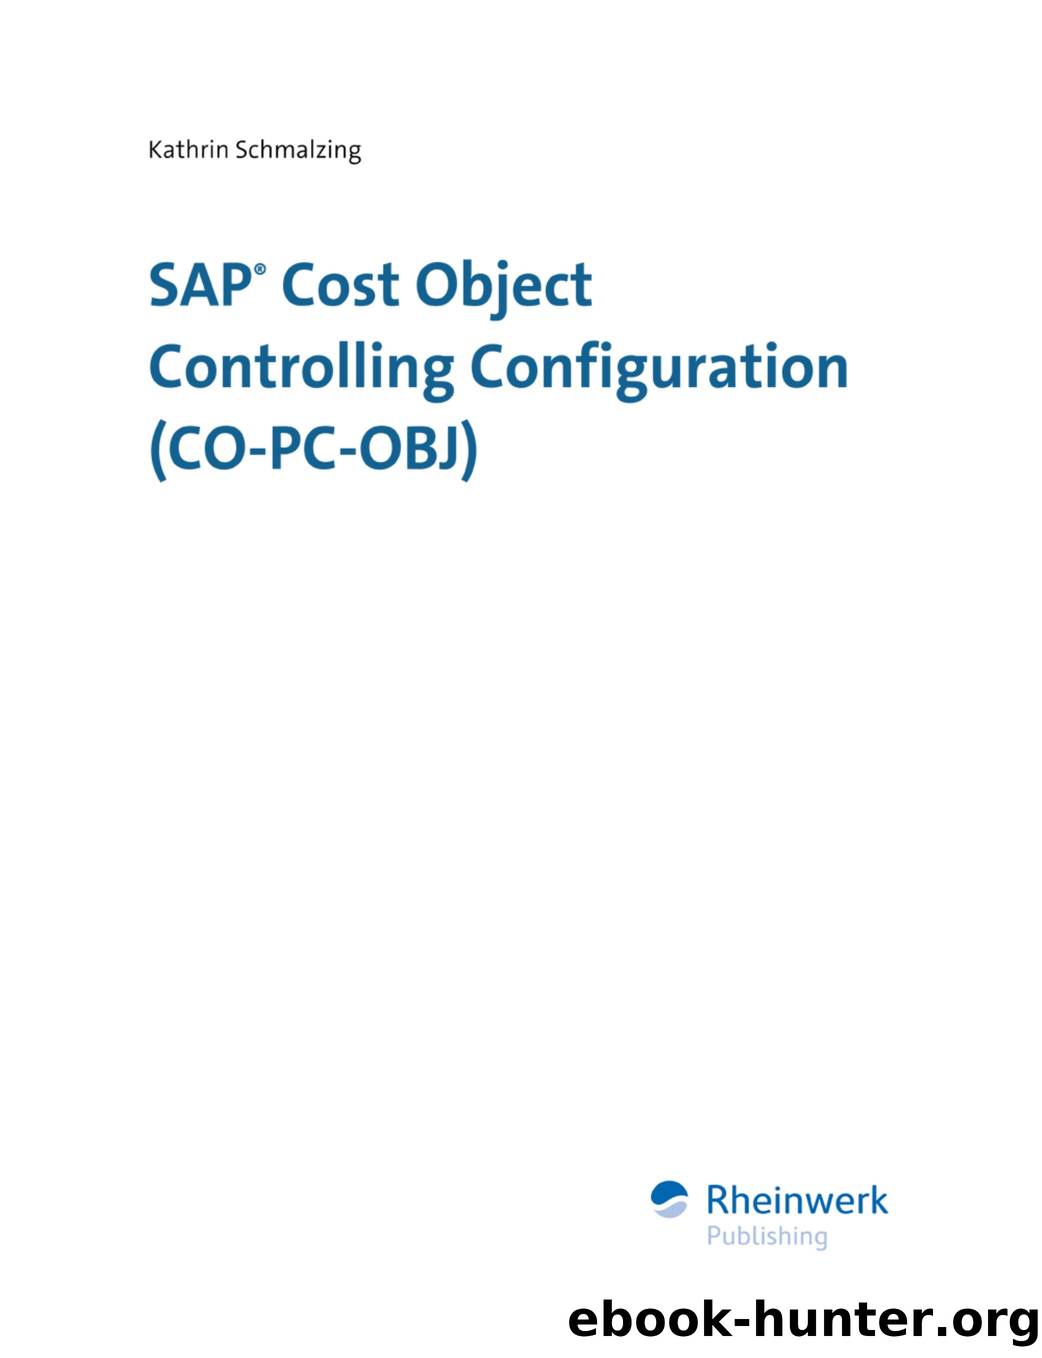 SAP Cost Object Controlling Configuration (CO-PC-OBJ) by Unknown